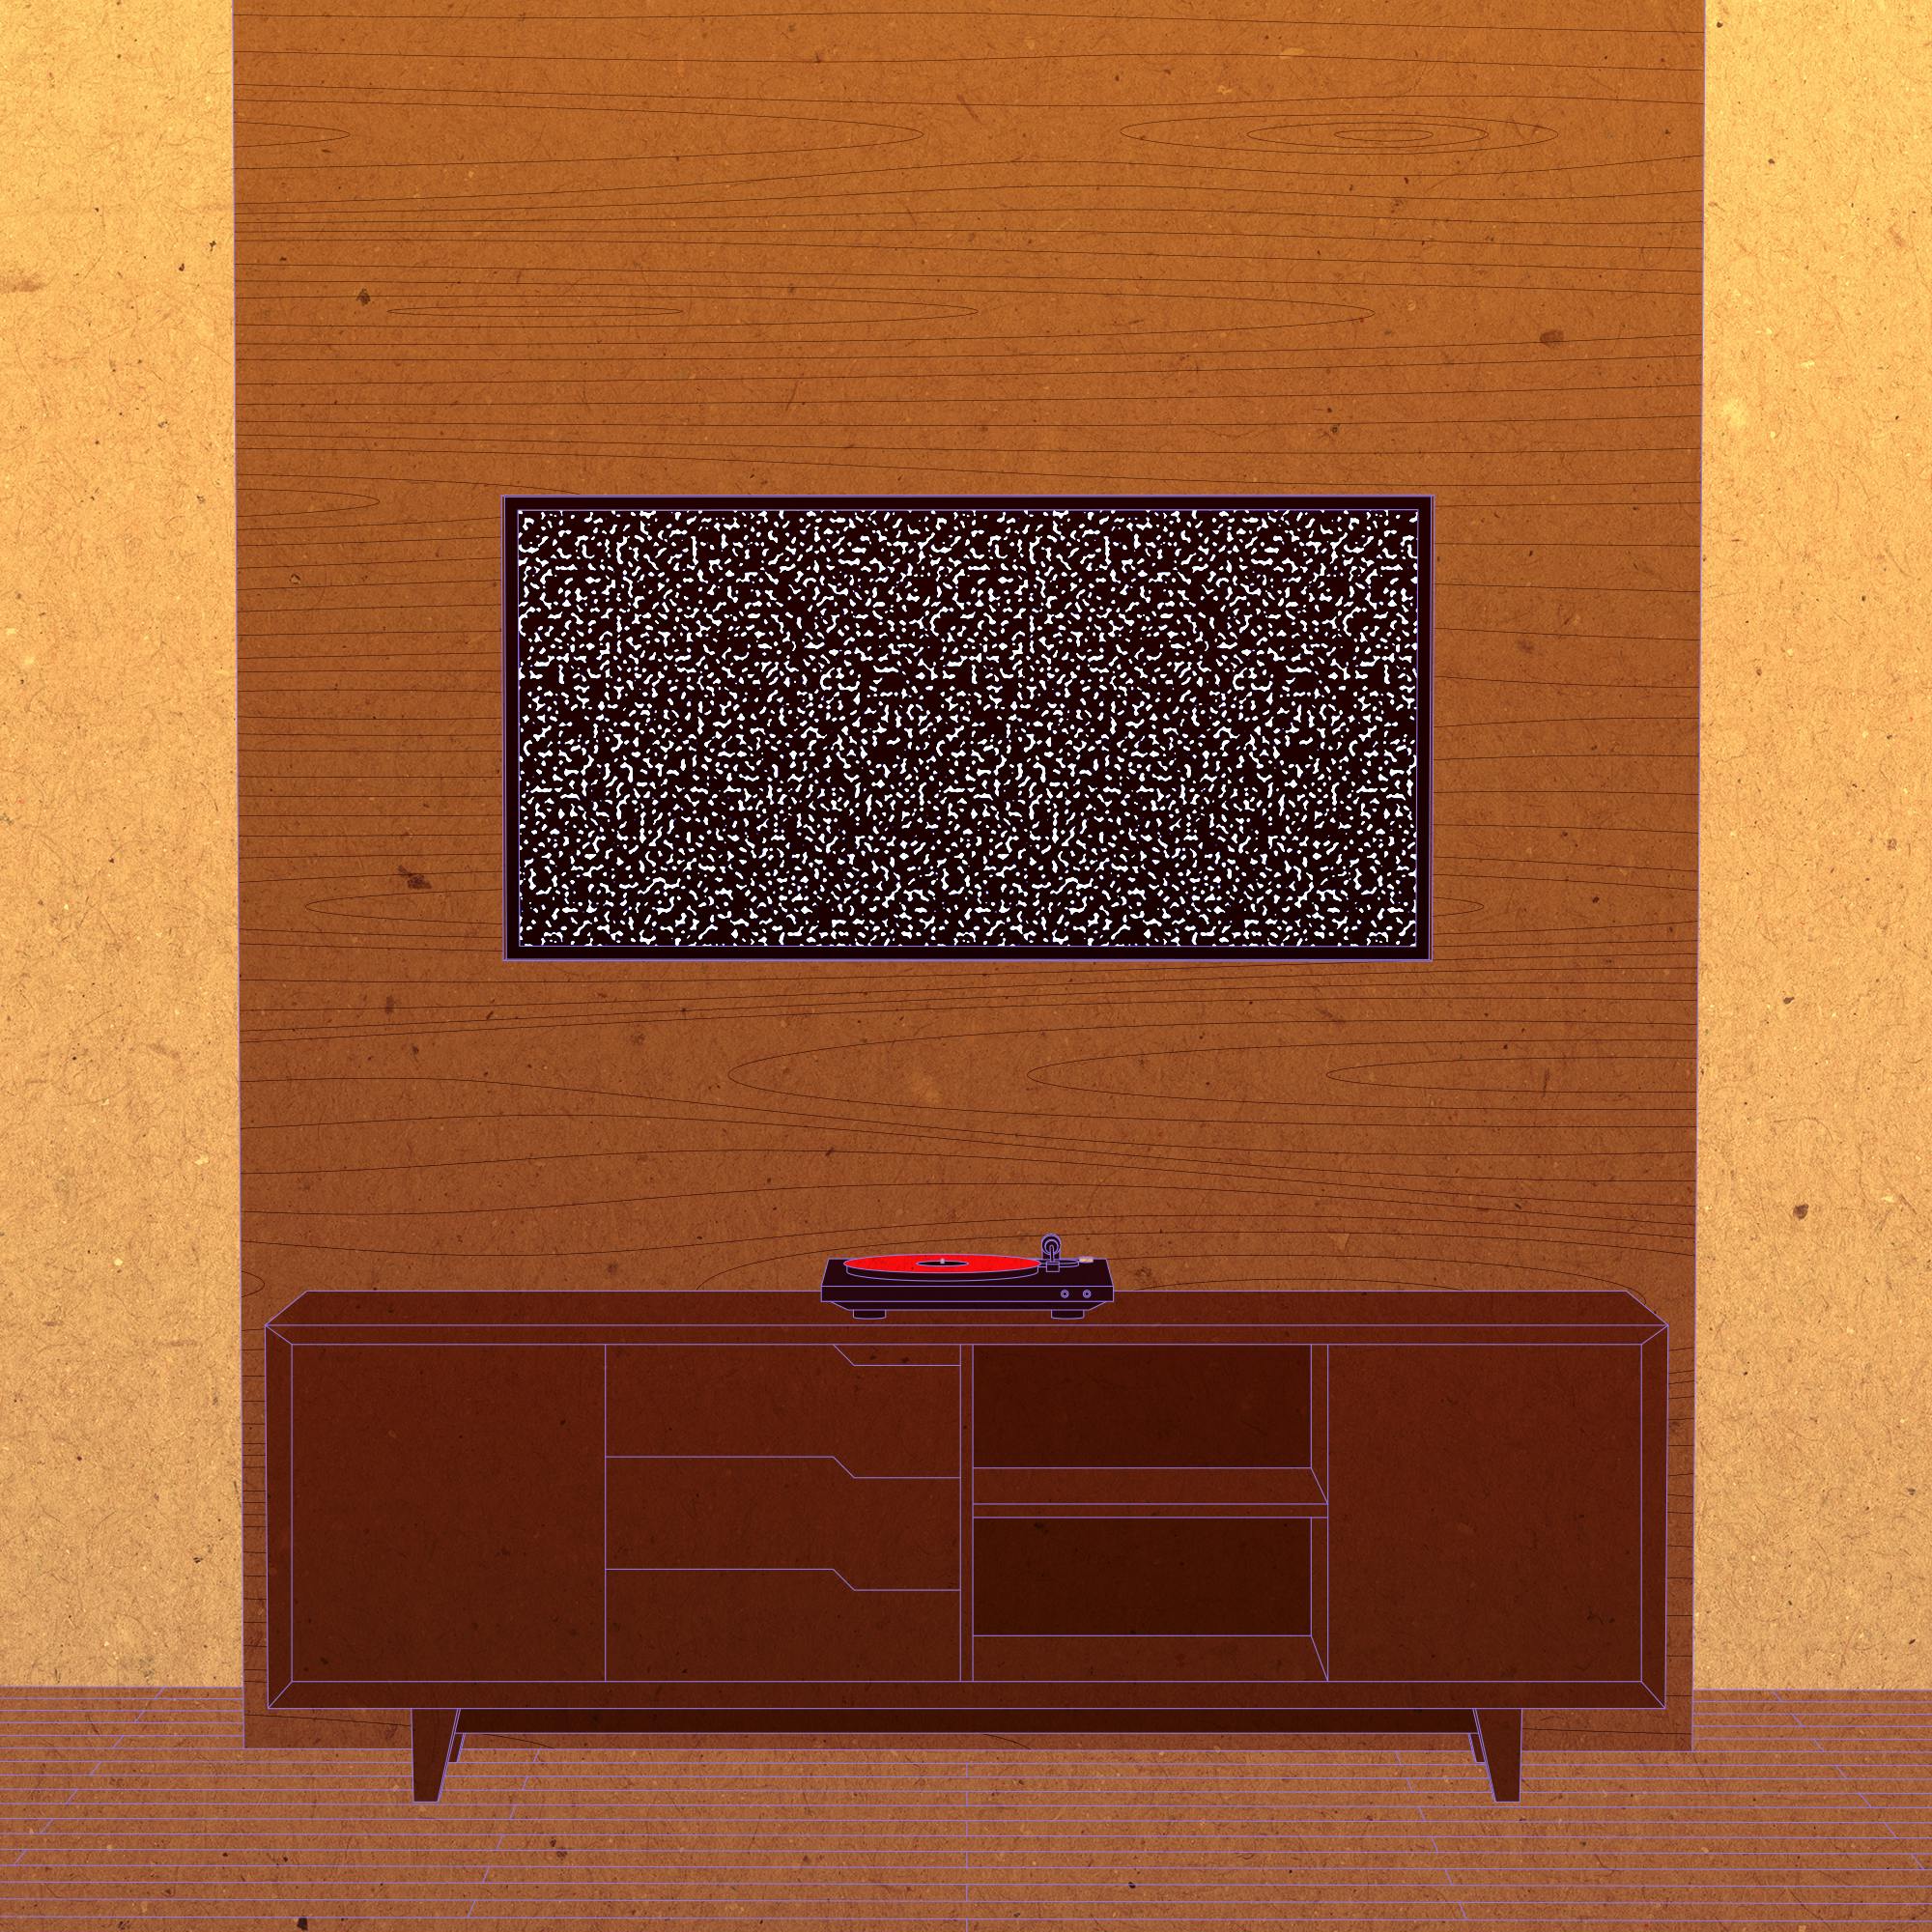 An illustrated TV with static above a credenza.